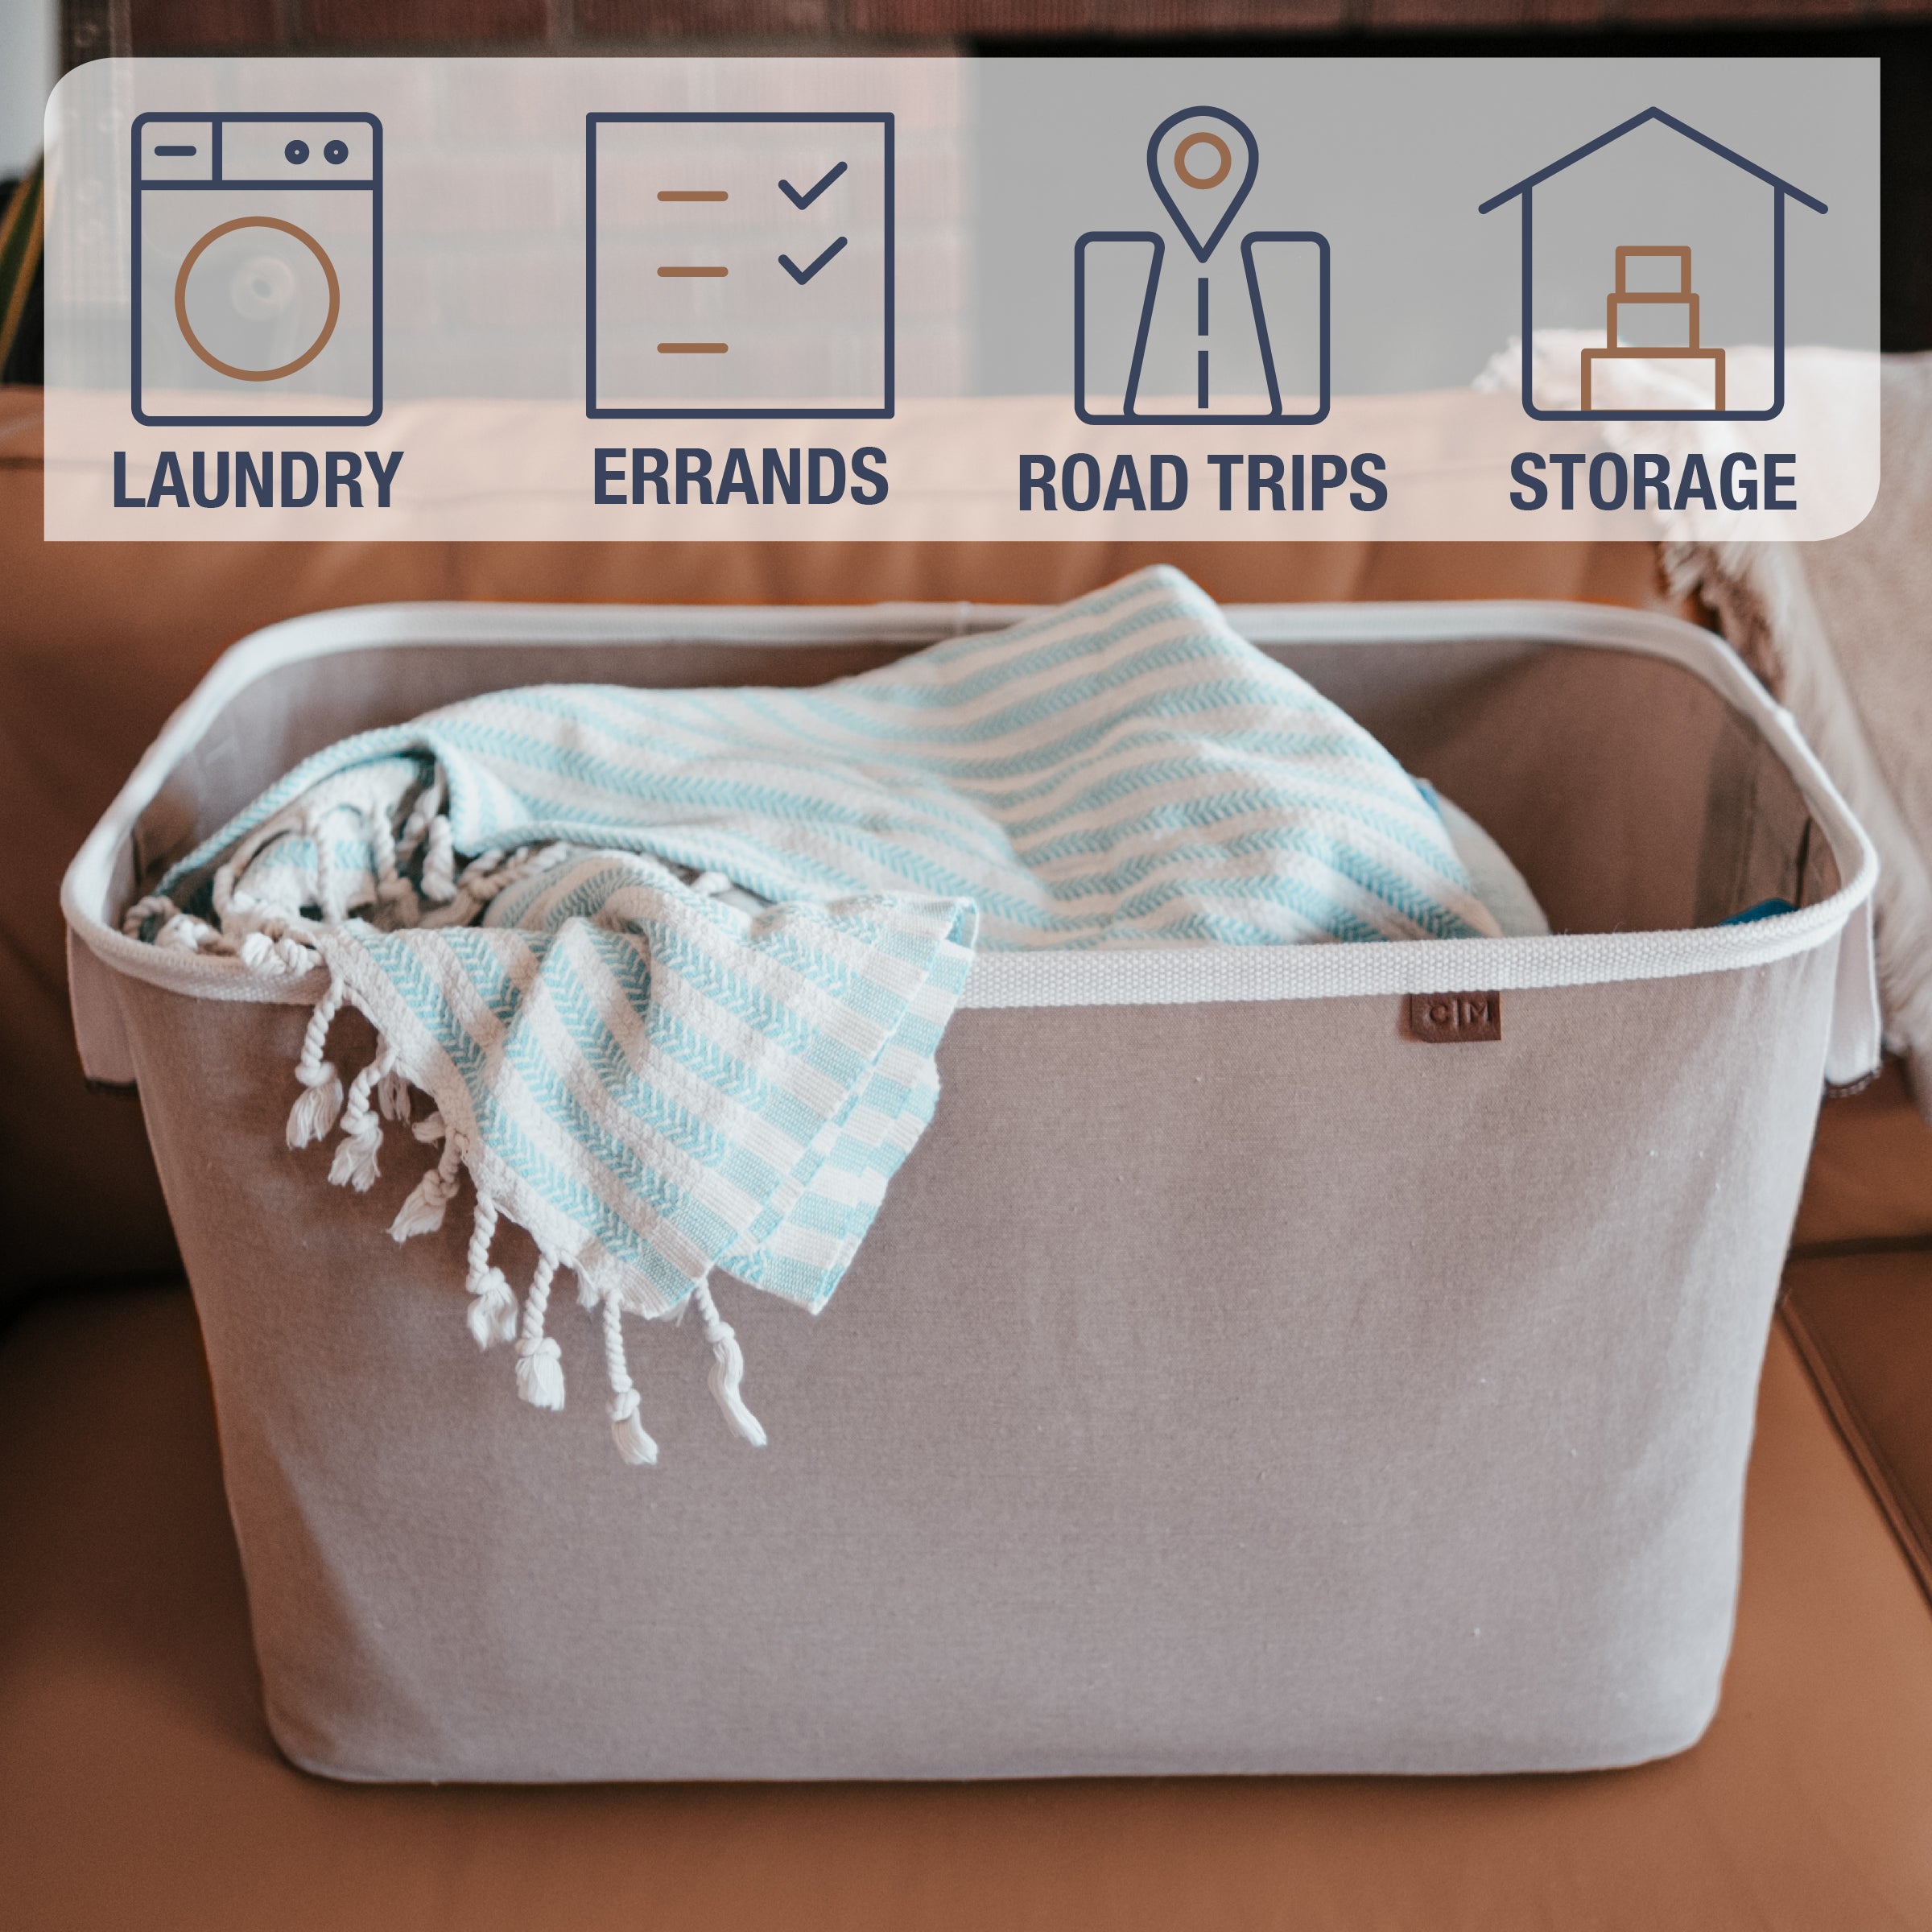 Clevermade Large Collapsible Laundry Basket 2-Pack